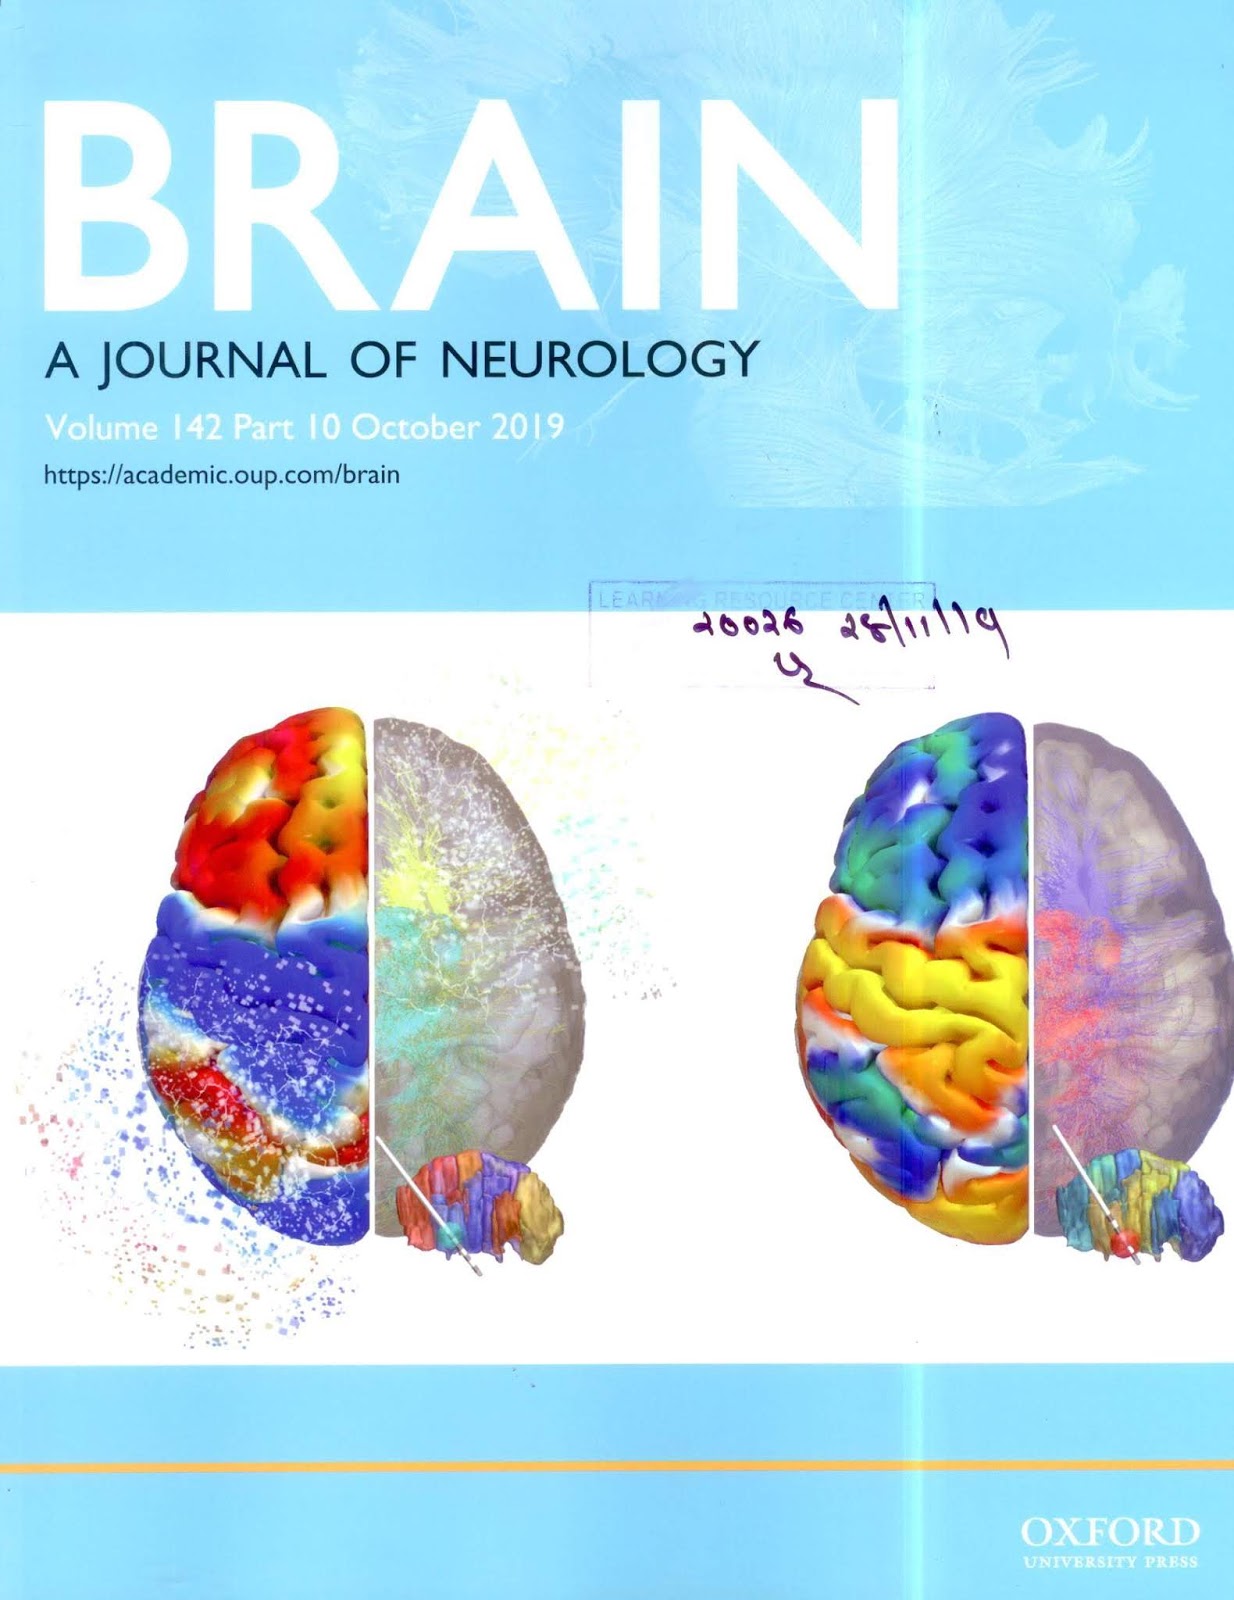 https://academic.oup.com/brain/issue/142/10